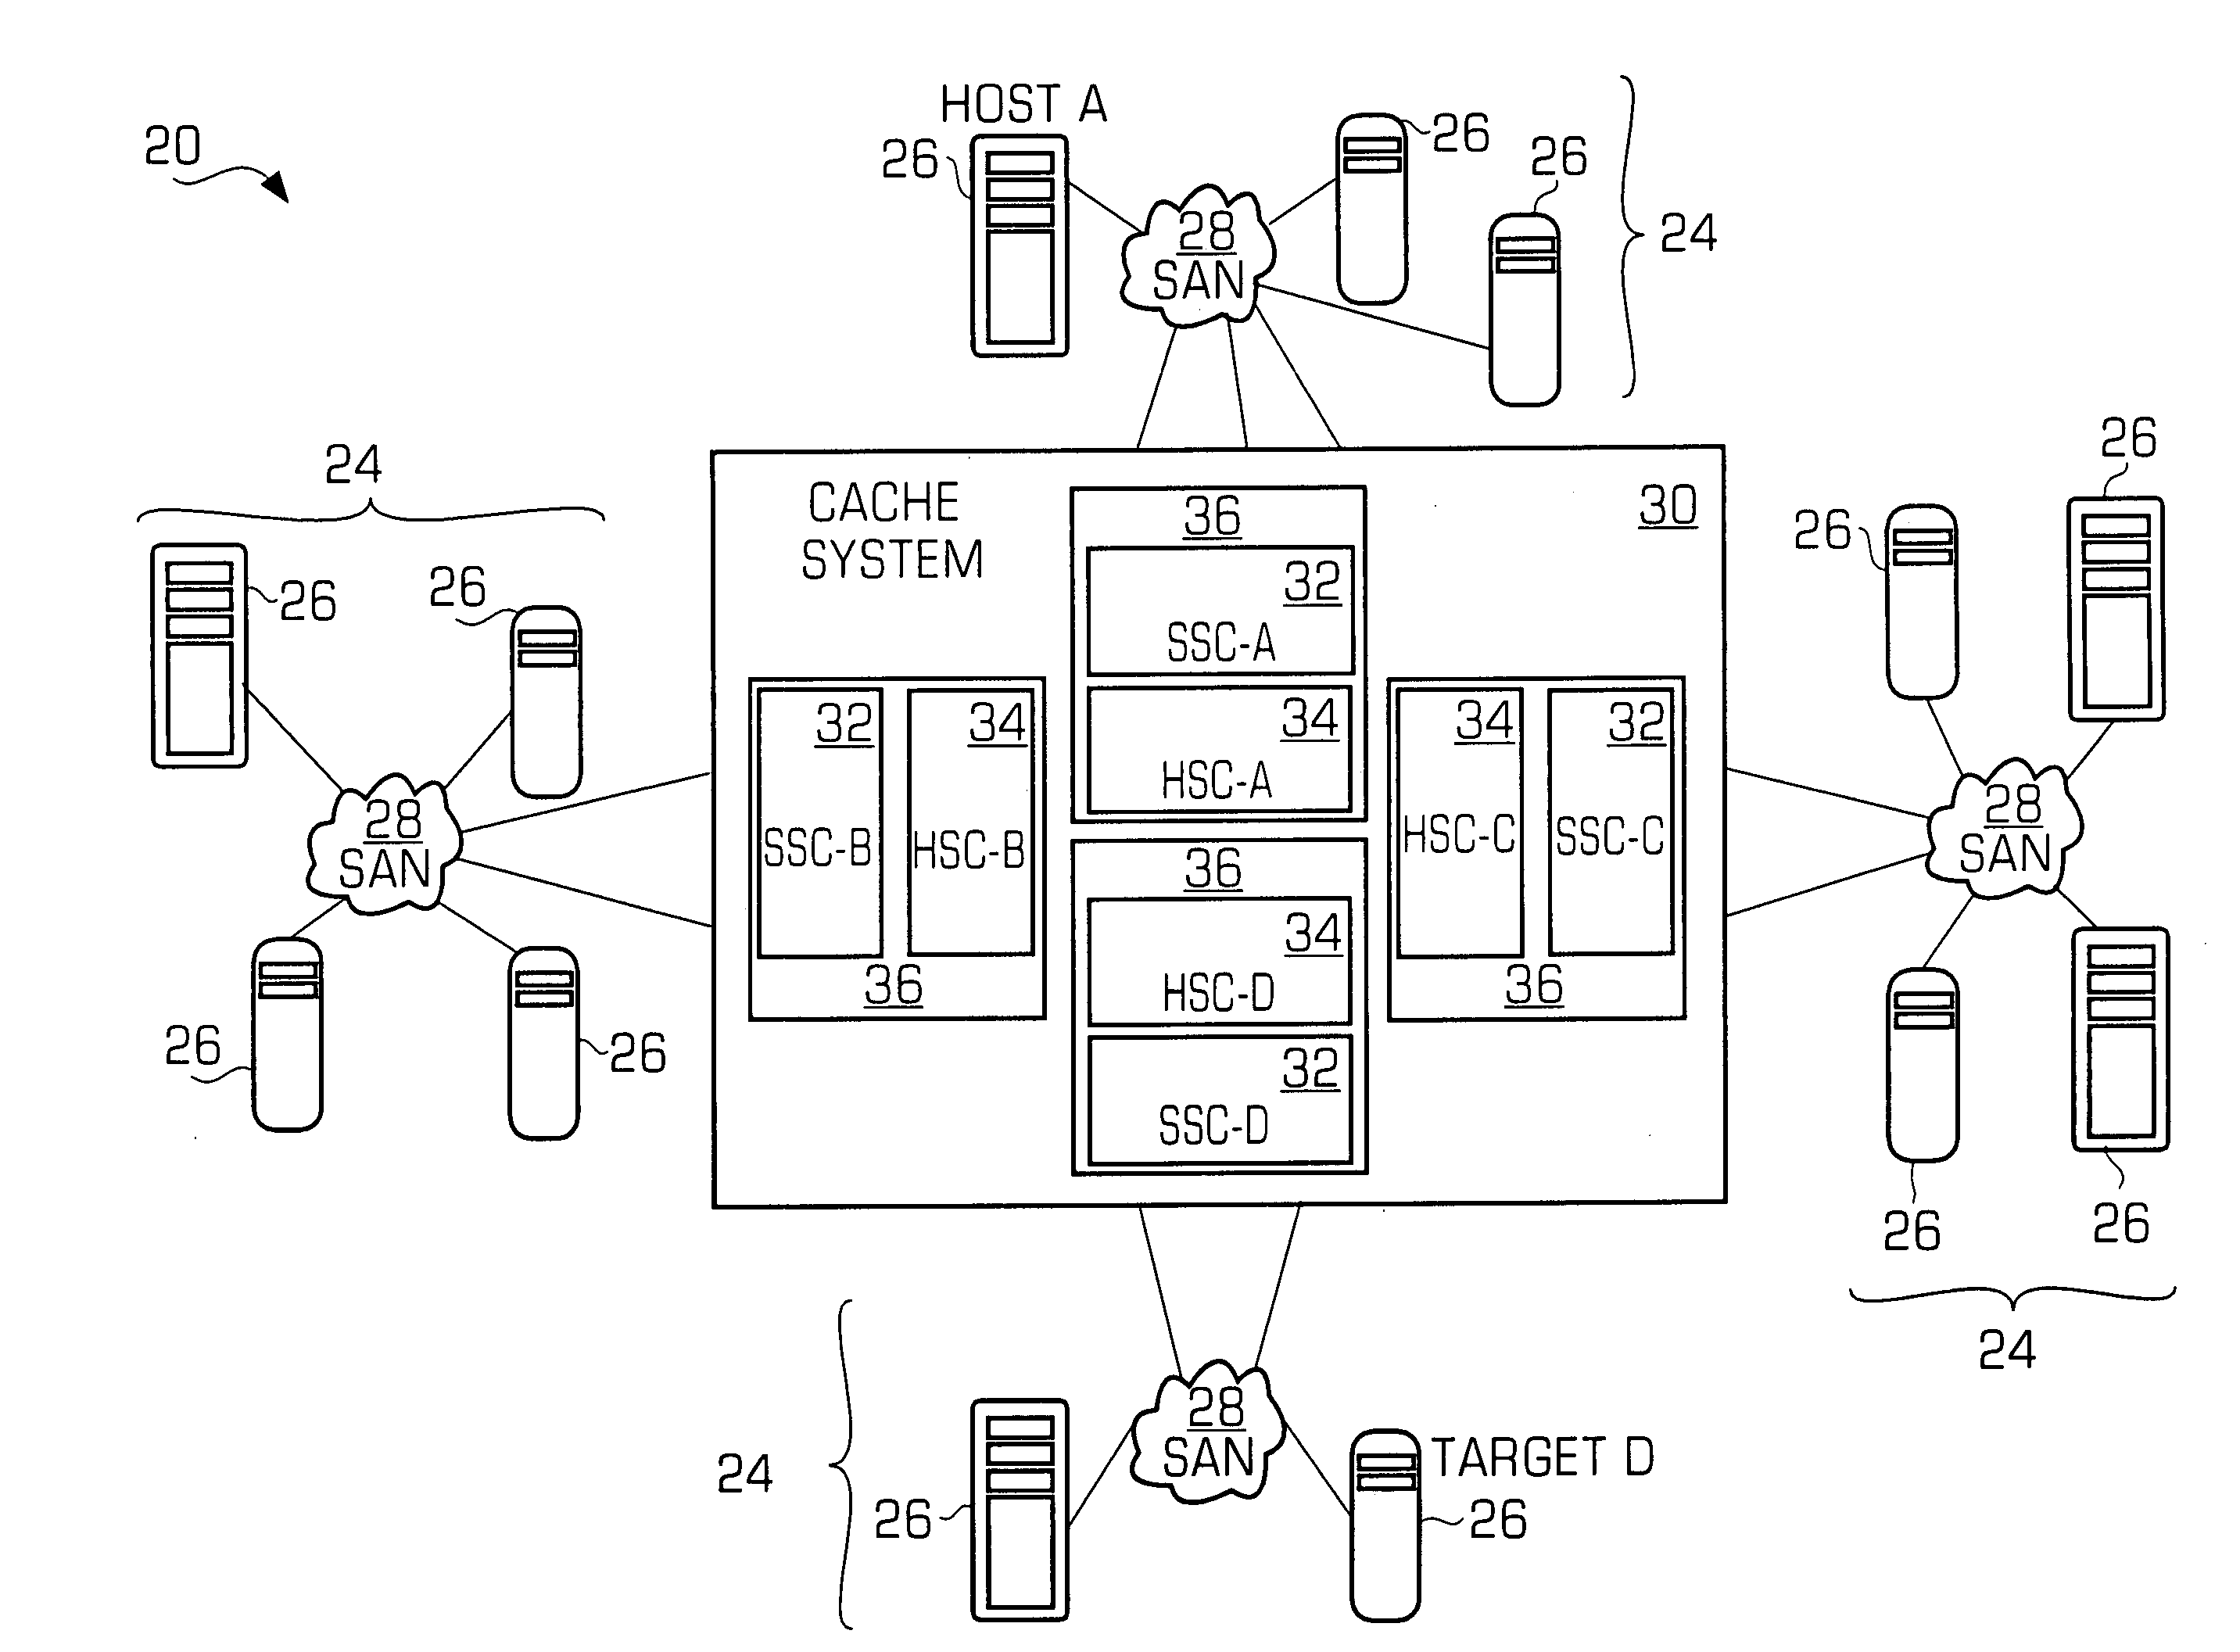 Caching system and method for a network storage system